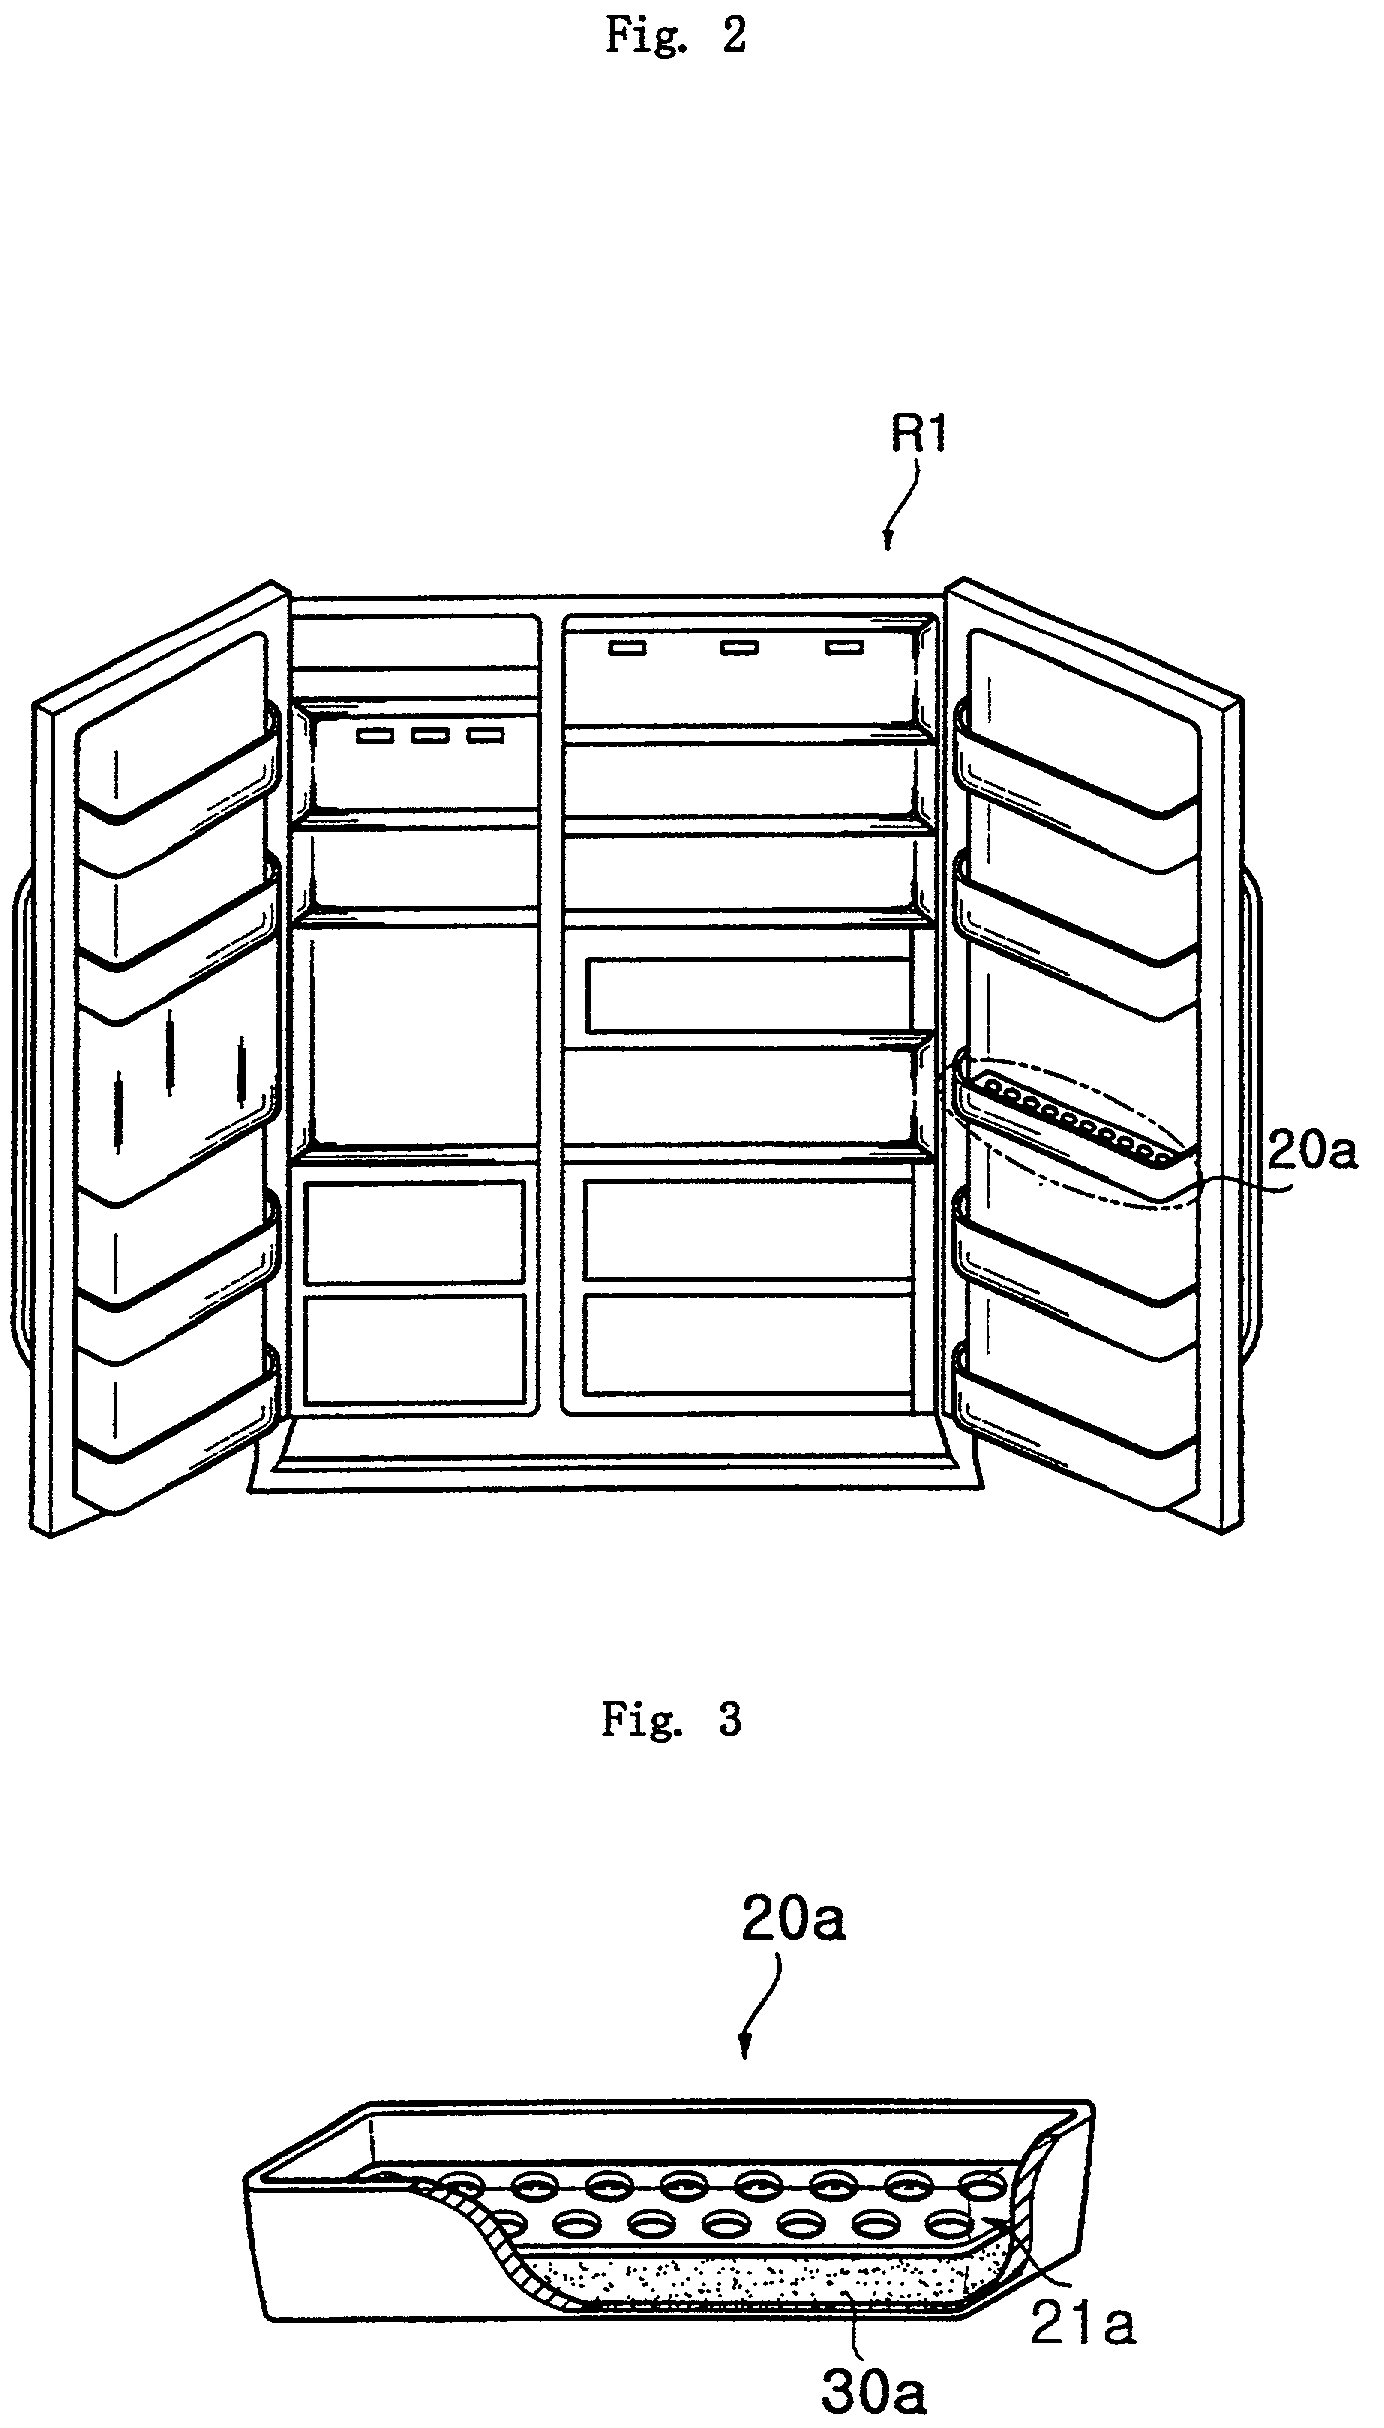 Refrigerator having automatic food ordering function and method for operating the same